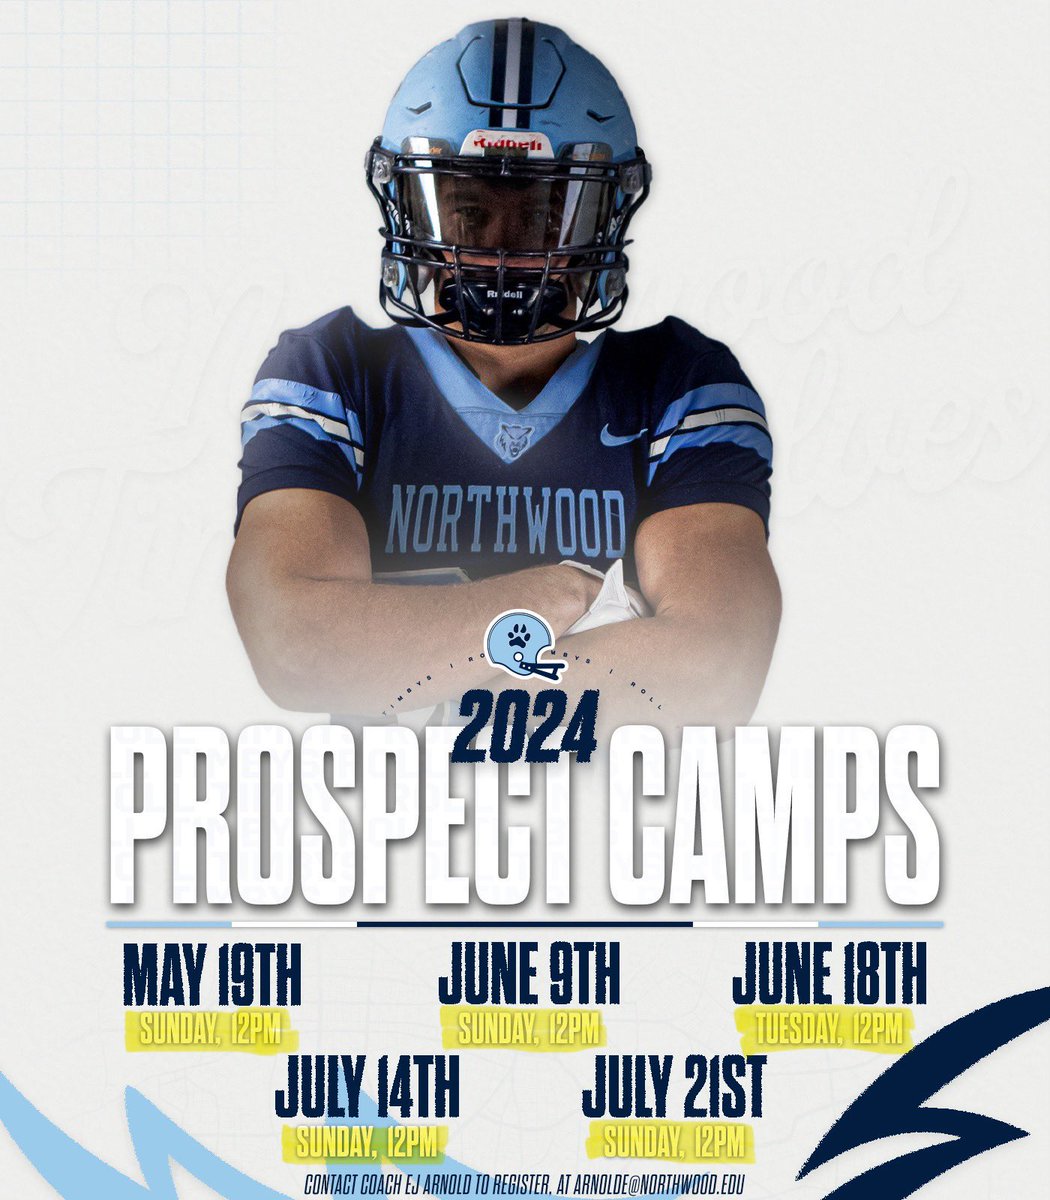 Camp season is coming! An important part of recruiting is in-person evaluation. Take advantage of an opportunity to get your name out there and work on your skill set. #LetItRip #GetNorth